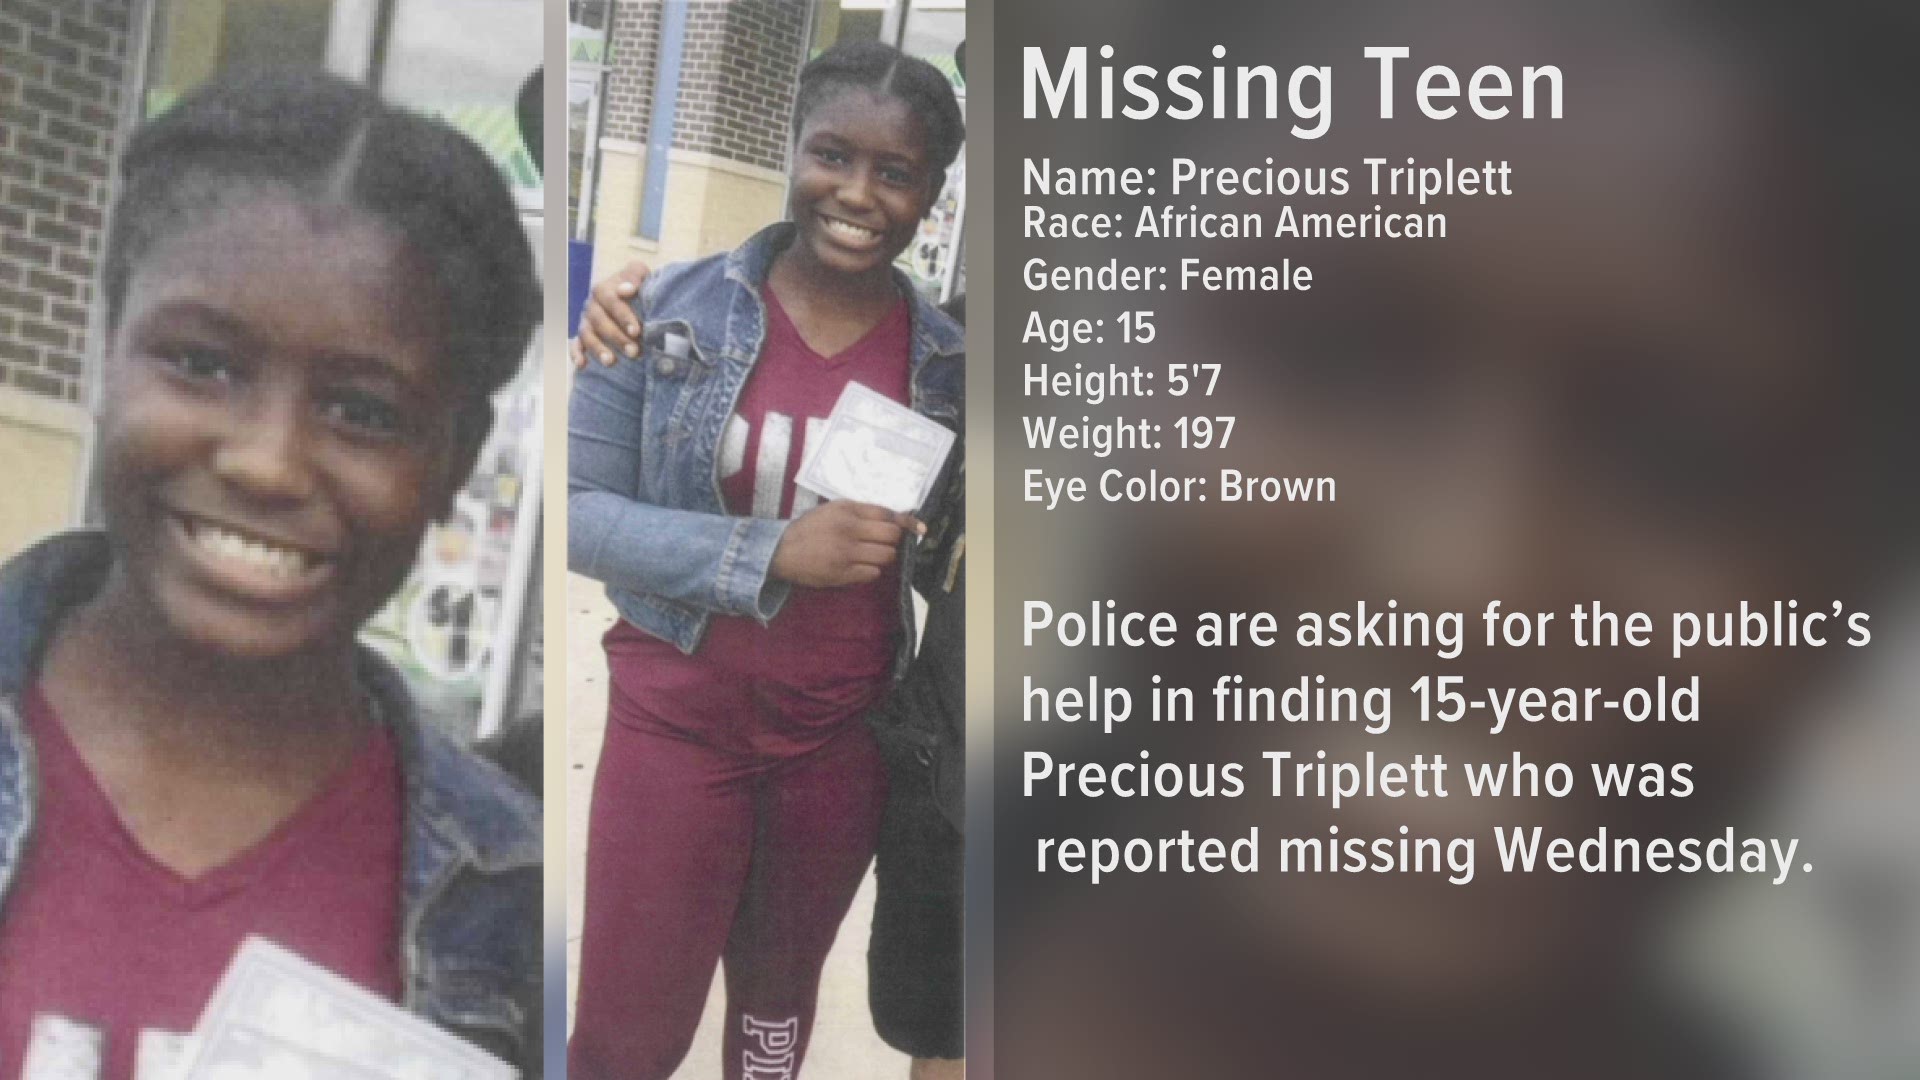 Police are asking for the public's help in finding 15-year-old Precious Triplett who was reported missing Wednesday.